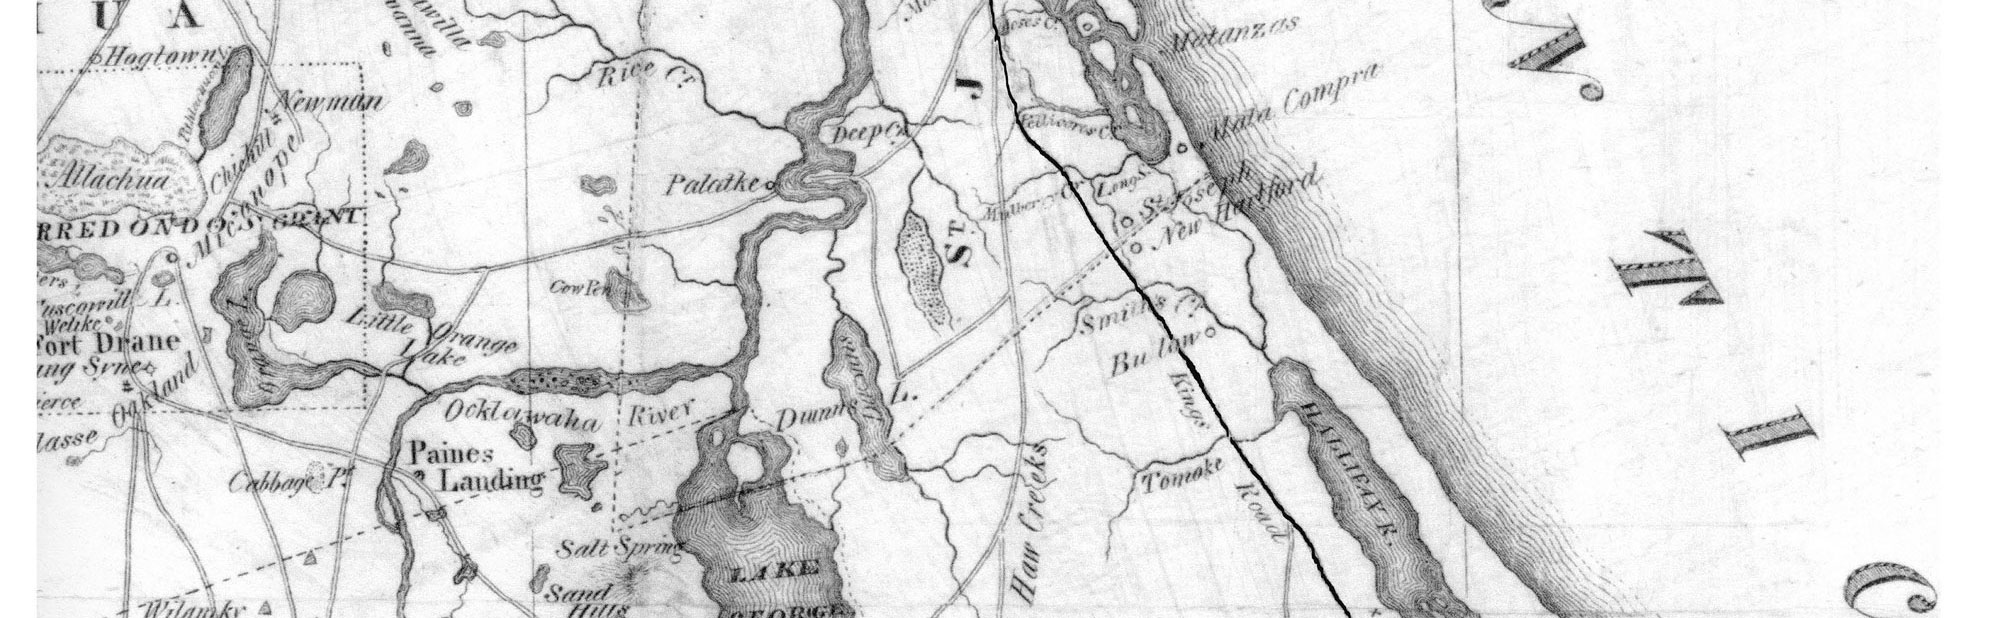 De Brahm 1765 Survey of our Area and Map